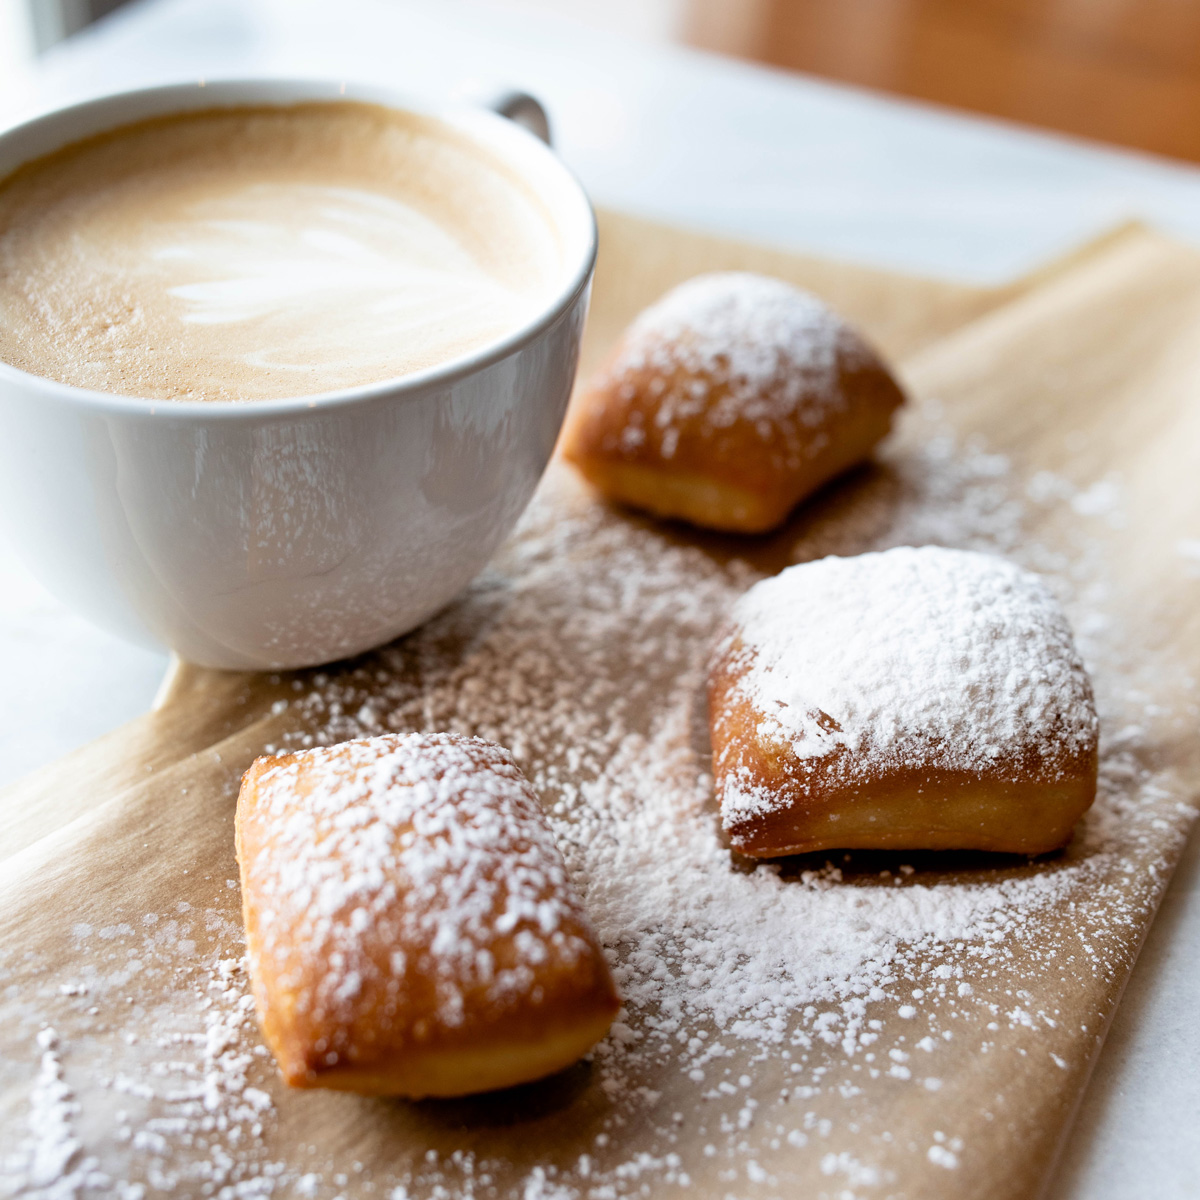 Three fluffy beignets with powdered sugar and a latte in a white mug on a tabletop